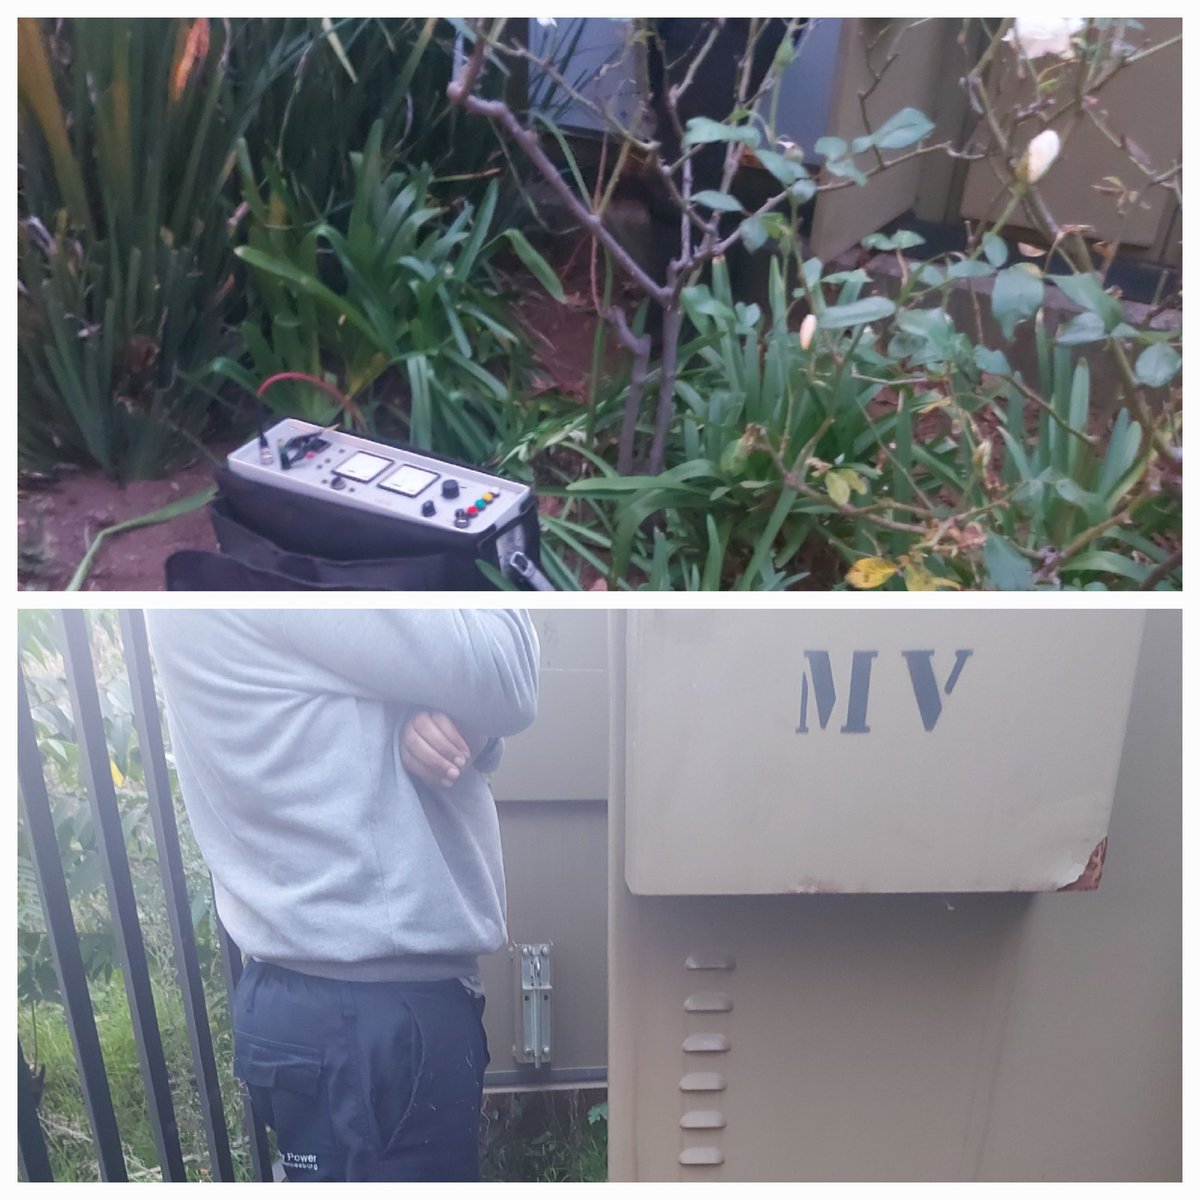 *Bryanston/ Riverclub Outage* 
Have just been onsite with the City Power team.
They are hard at work, locating the fault.

As and when I get updates, I will share them.